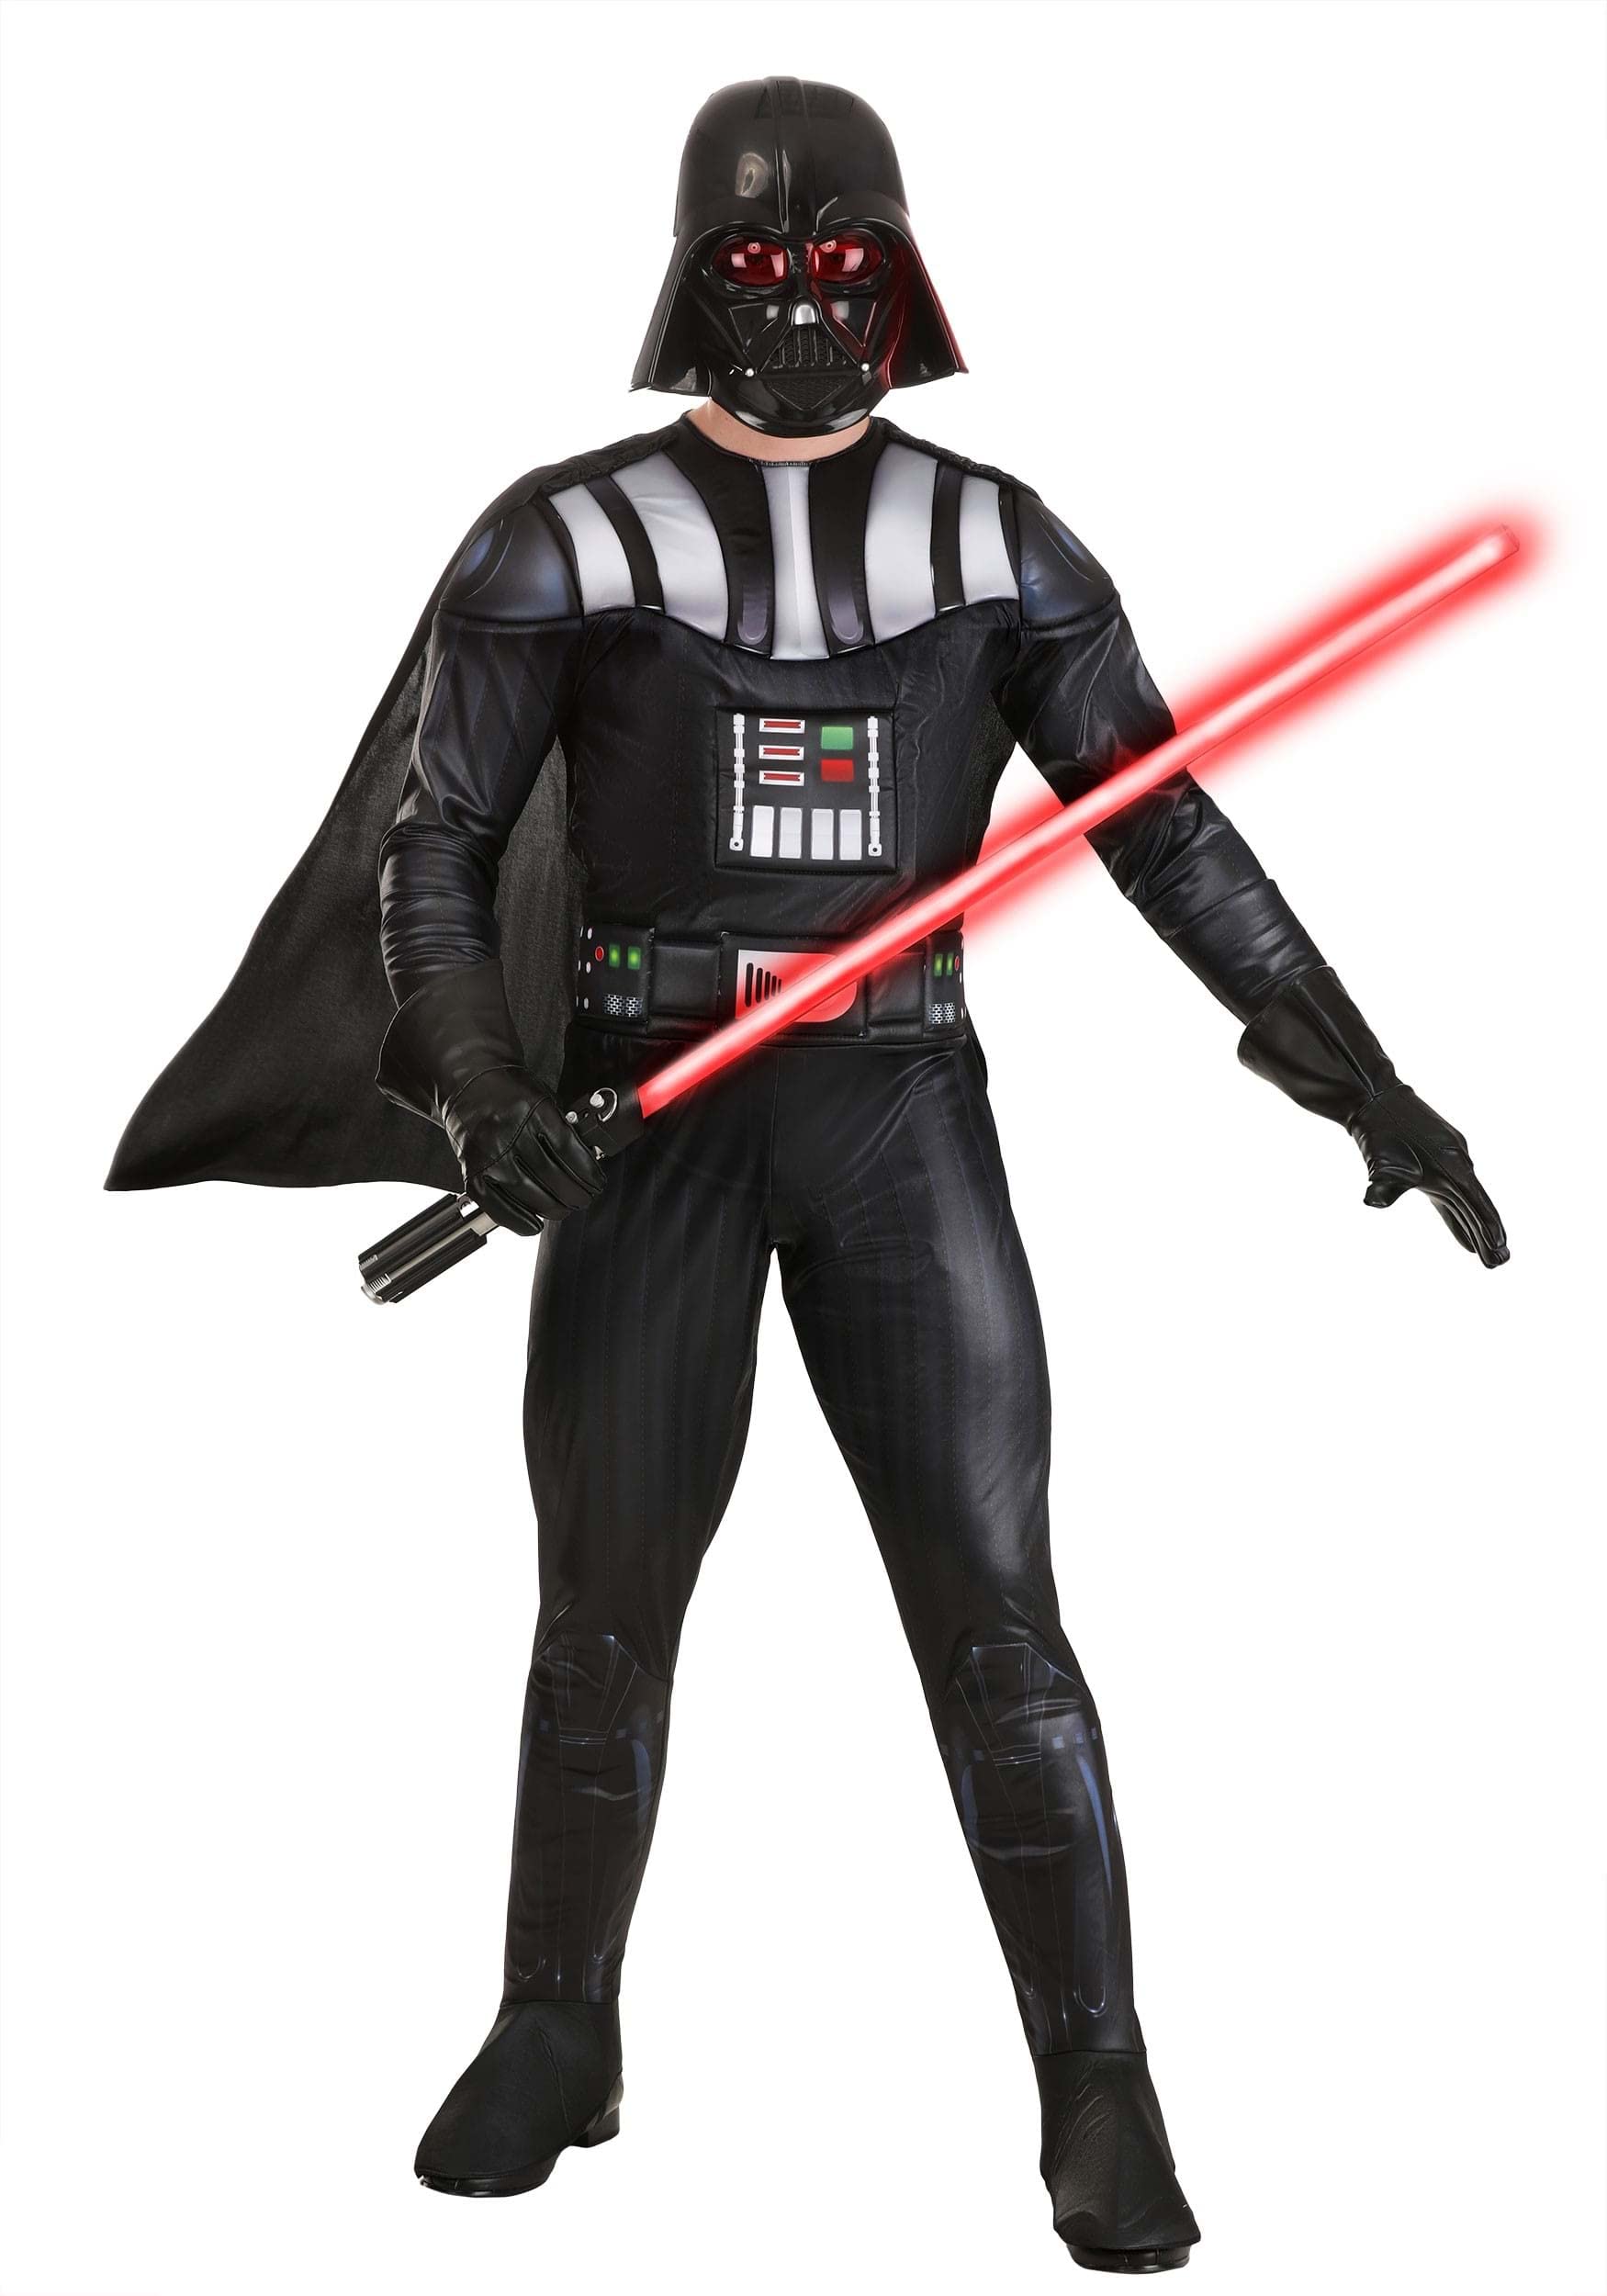 Star Wars Deluxe Adult Darth Vader Costume, Mens Halloween Costumes - Officially Licensed